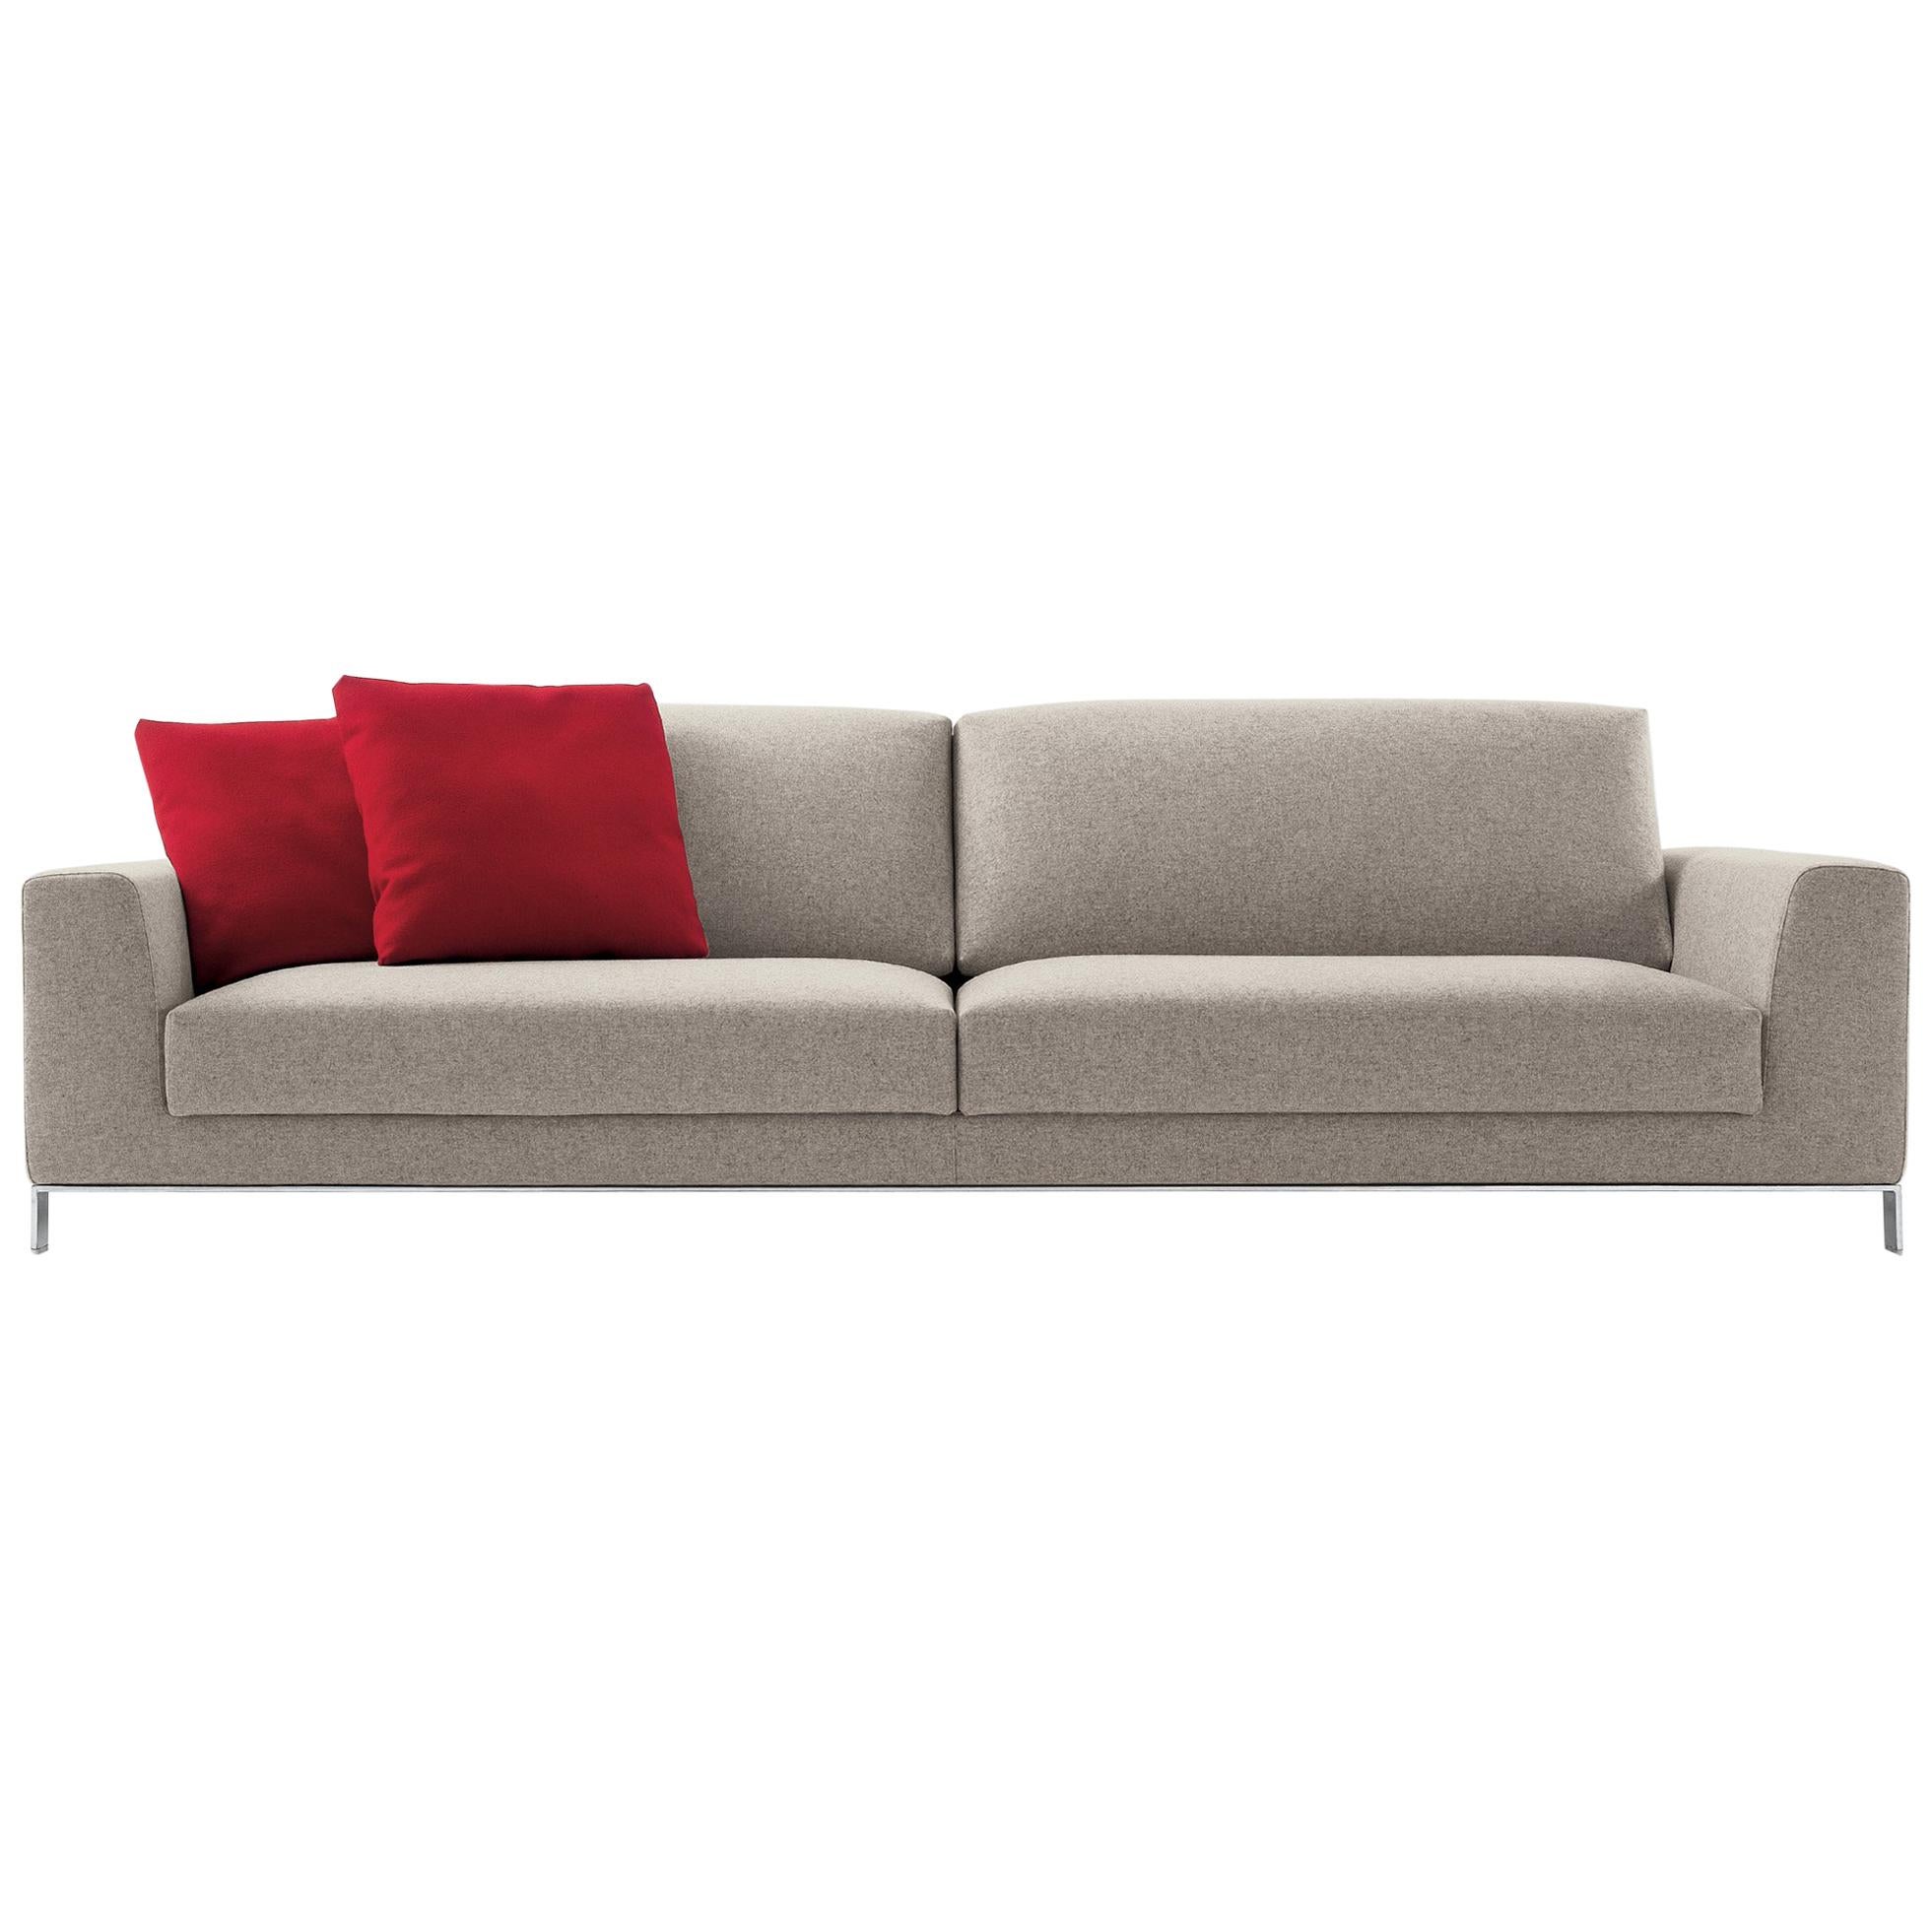 Nube Italia Eddy Sofa in Tan Upholstery by Kemistry of Style